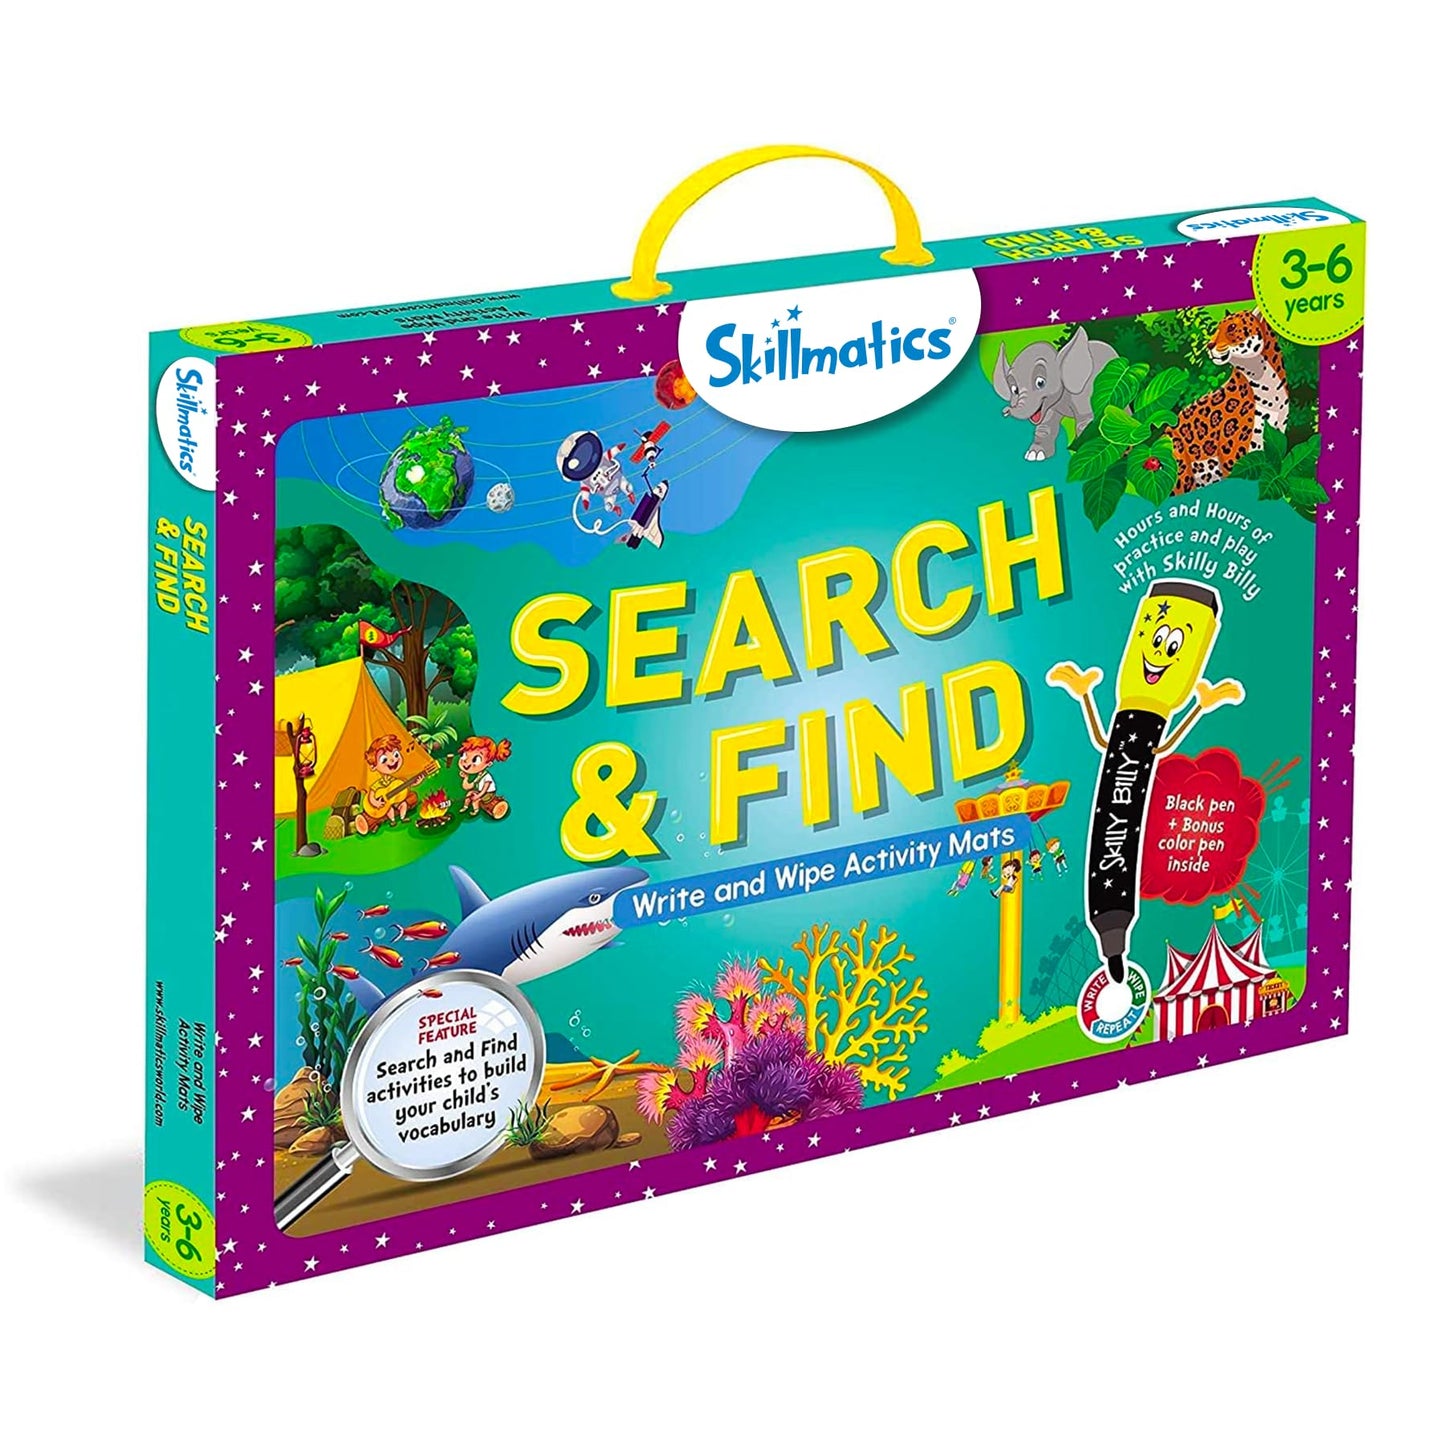 Skillmatics Preschool Learning Activity - Search and Find Educational Game, Perfect for Kids, Toddlers Who Love Toys, Art and Craft Activities, Gifts for Girls and Boys Ages 3, 4, 5, 6